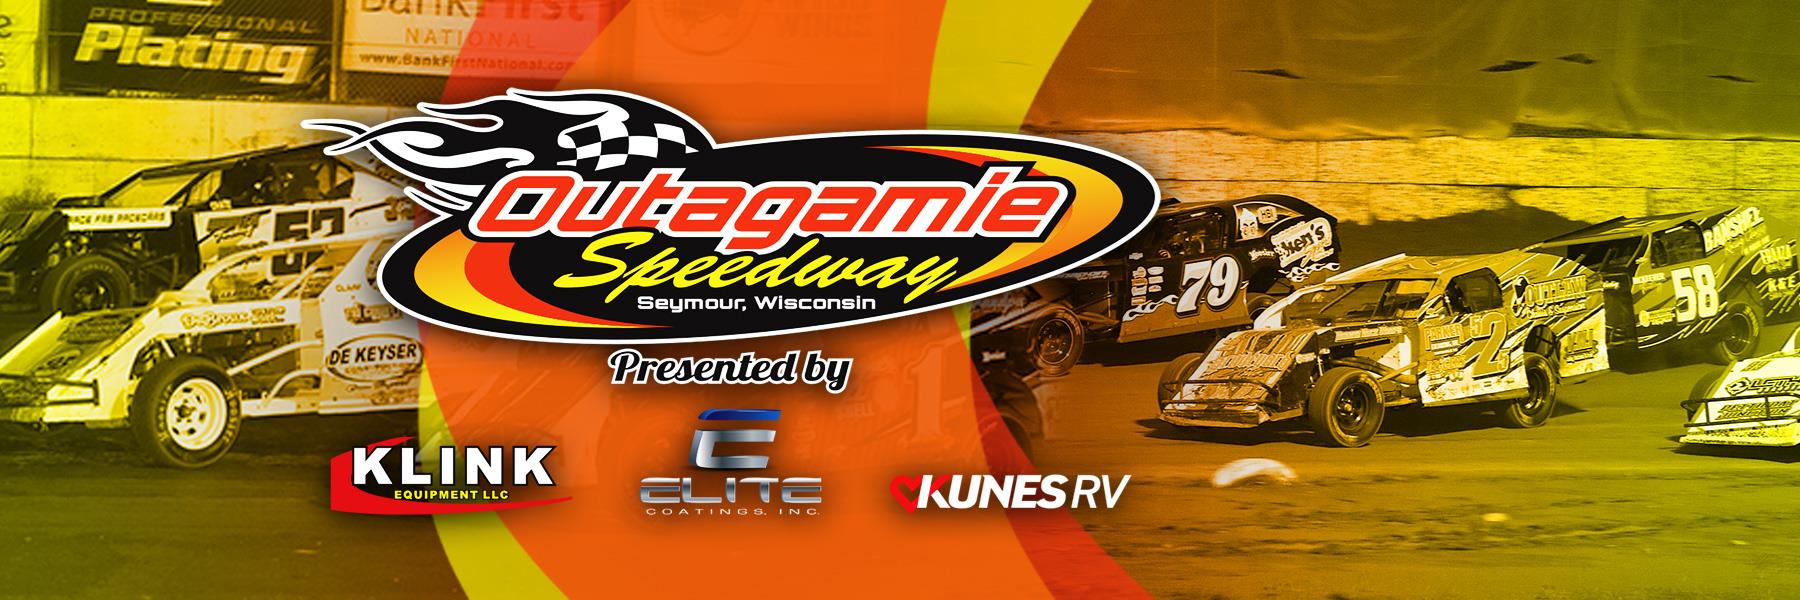 5/27/2022 - Outagamie Speedway